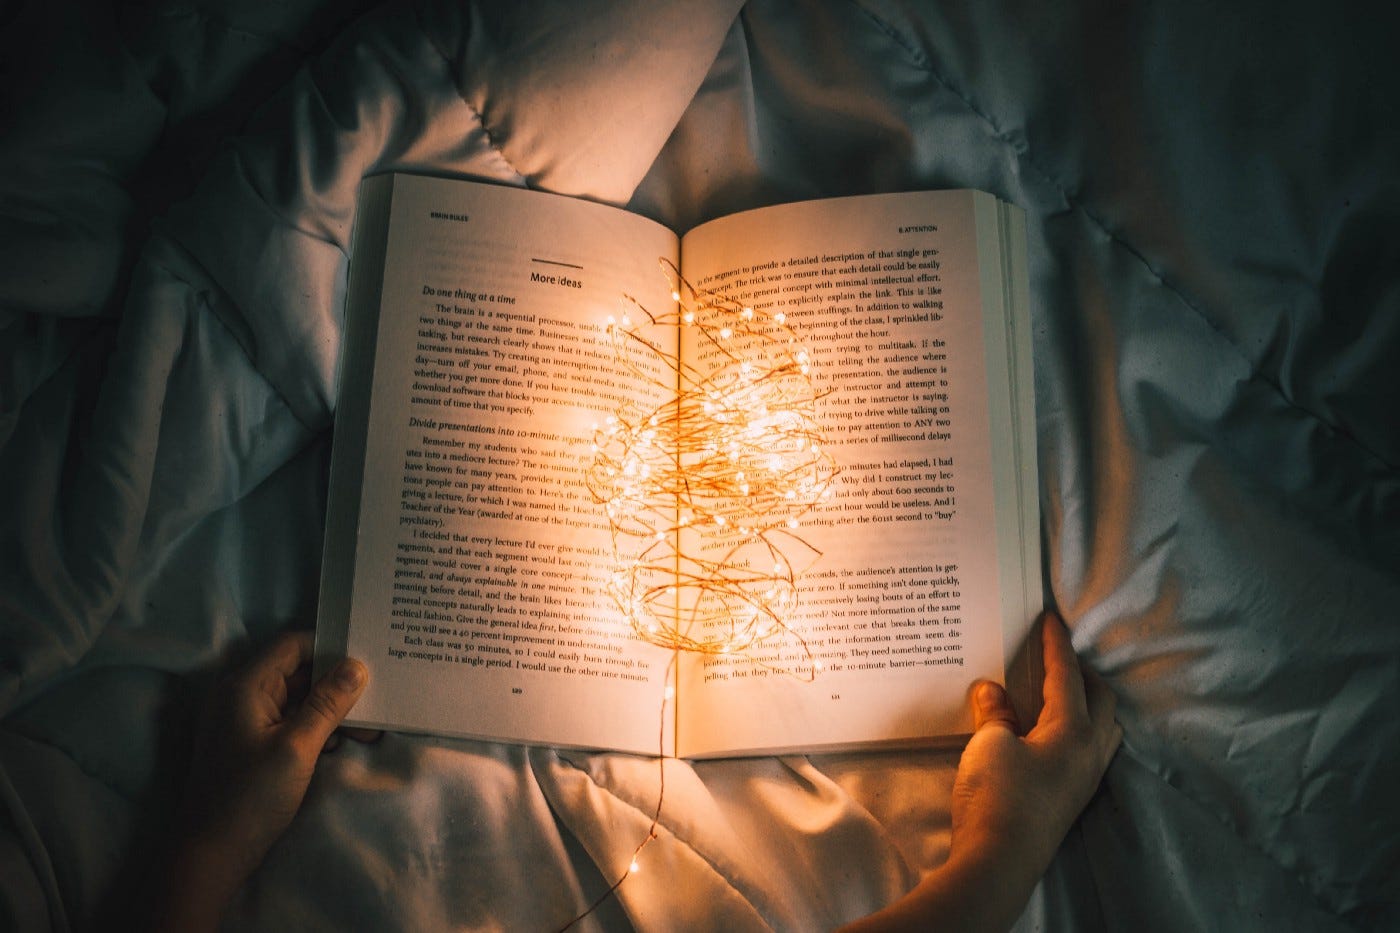 An open book being held by two hands on a bed cover. Small lights on a wire, like Christmas lights, are resting in the open crevice and lit, illuminating the words on the pages.